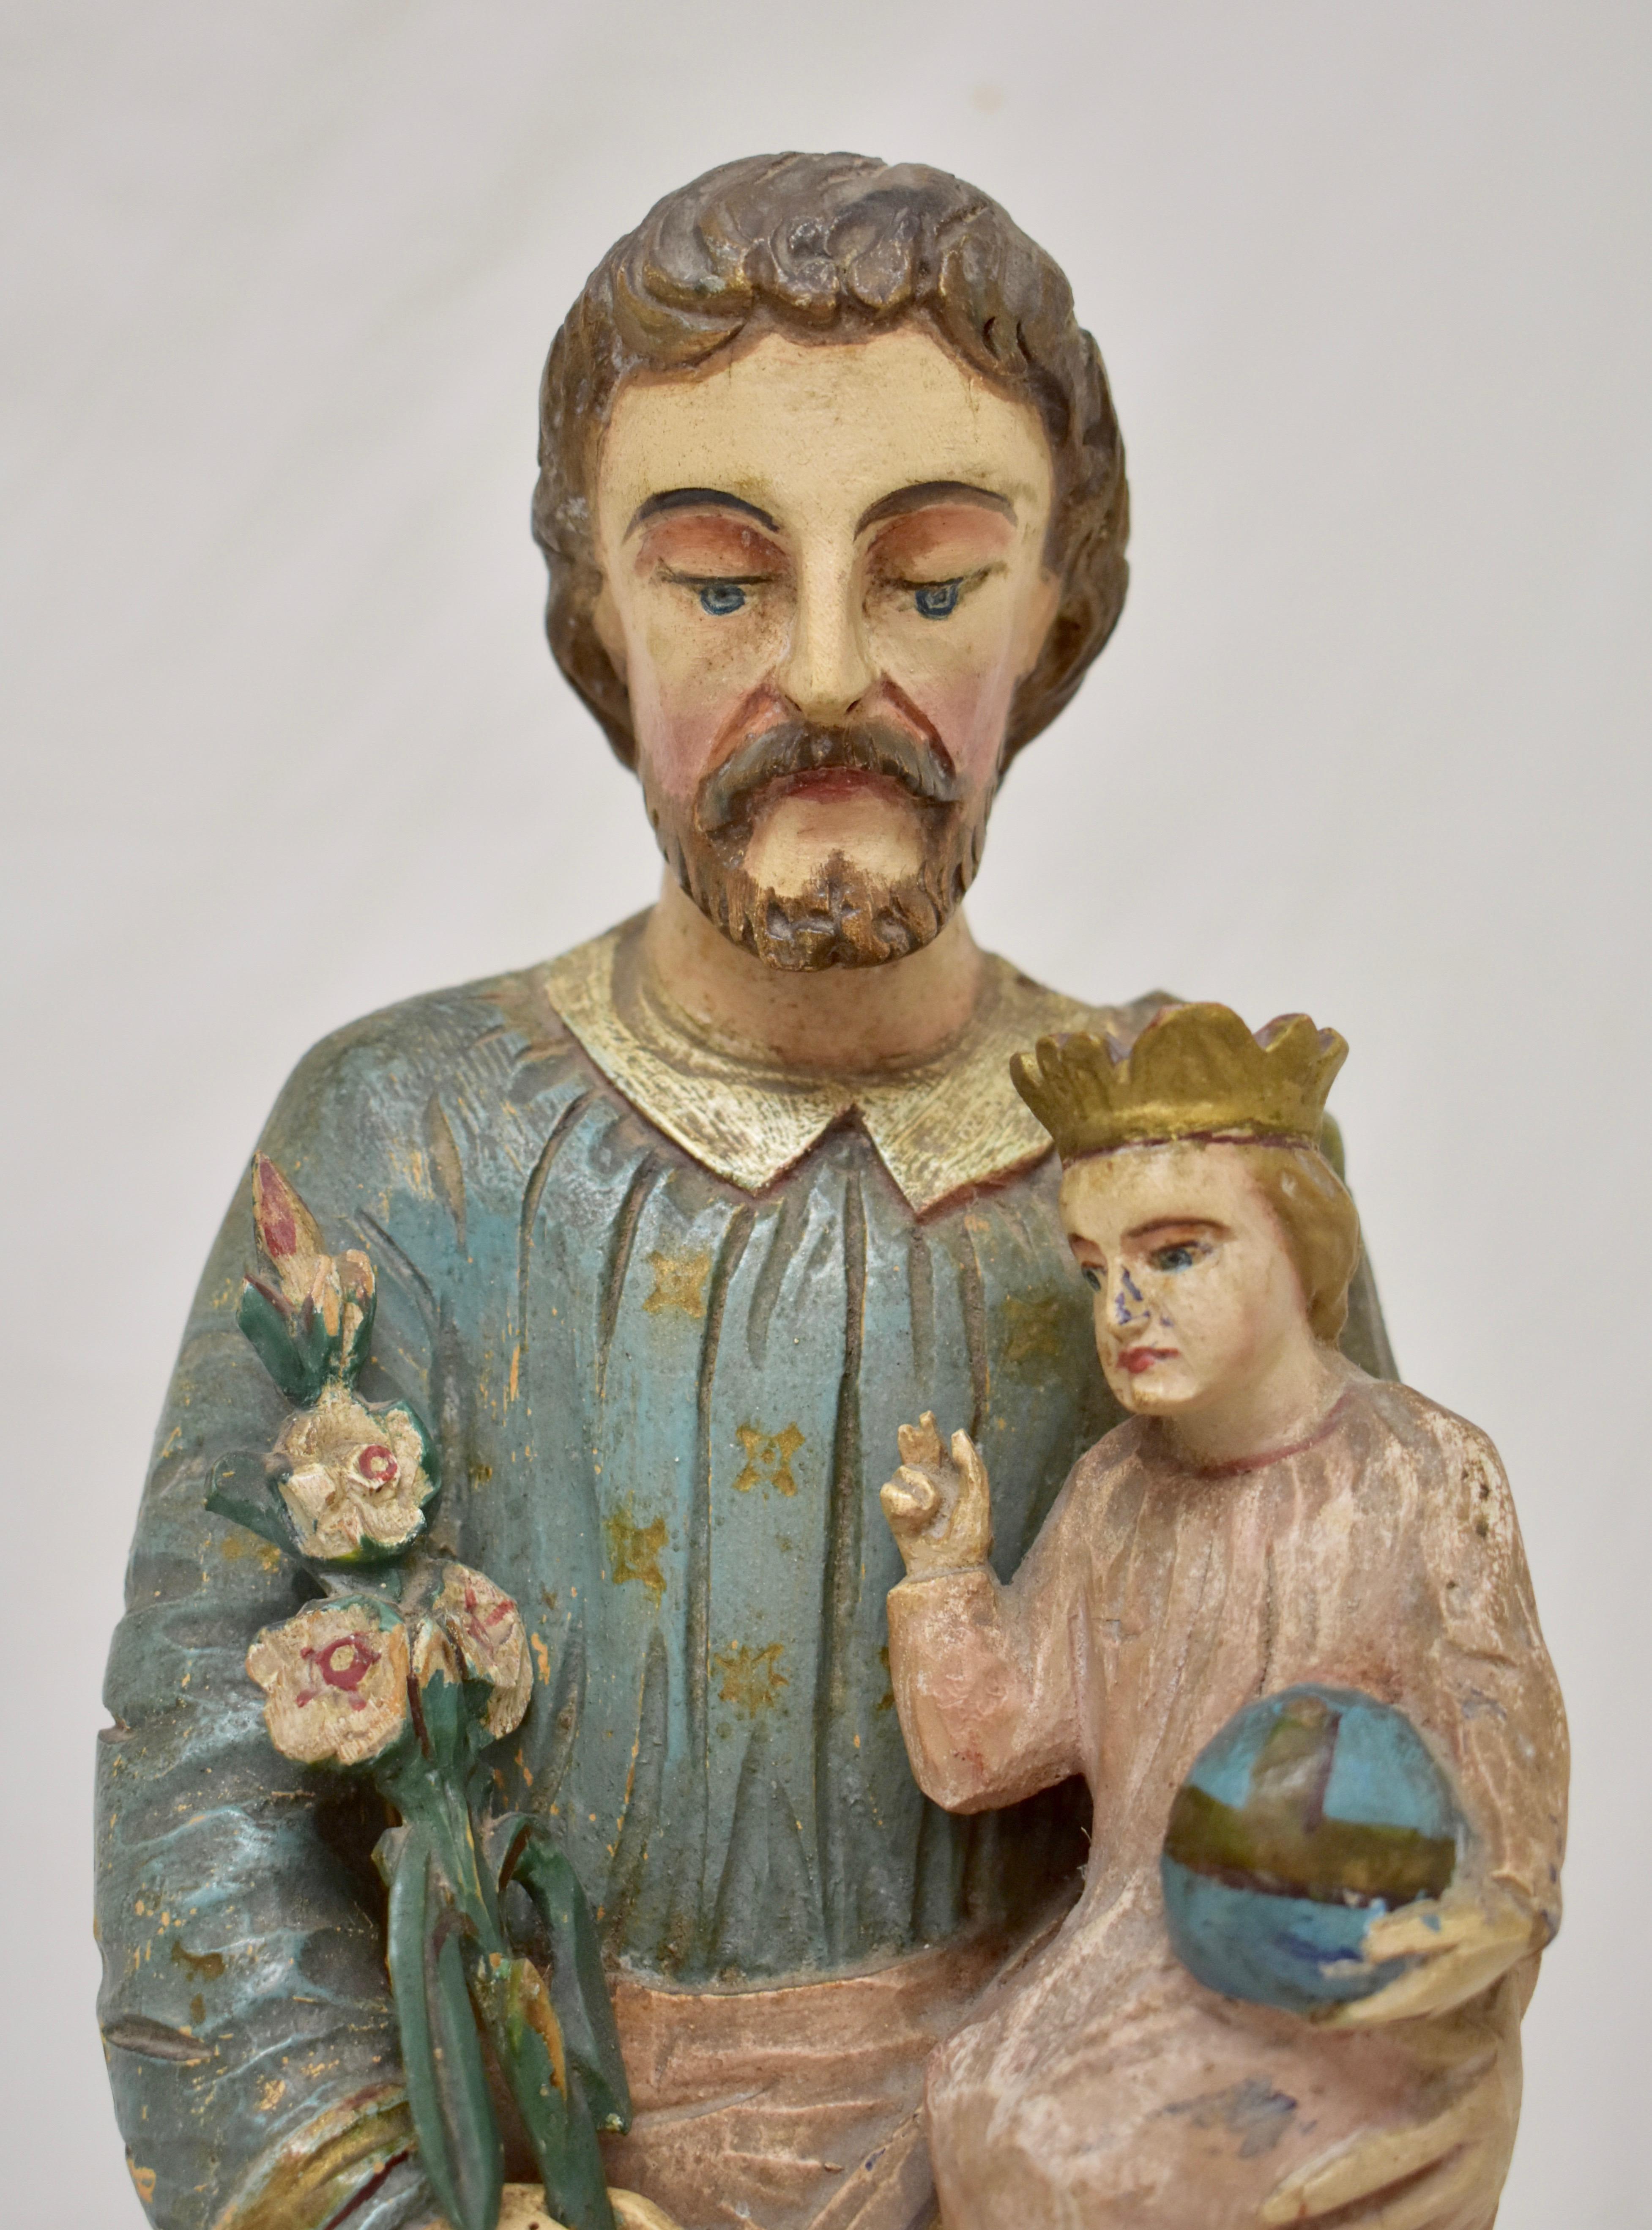 This is a striking Primitive hand carved statue of Saint Joseph.  The Saint stands with head slightly bowed and with a reverent expression. He is clothed in a long blue tunic bearing pressed, gold-painted floral buds, beneath a green toga, slung